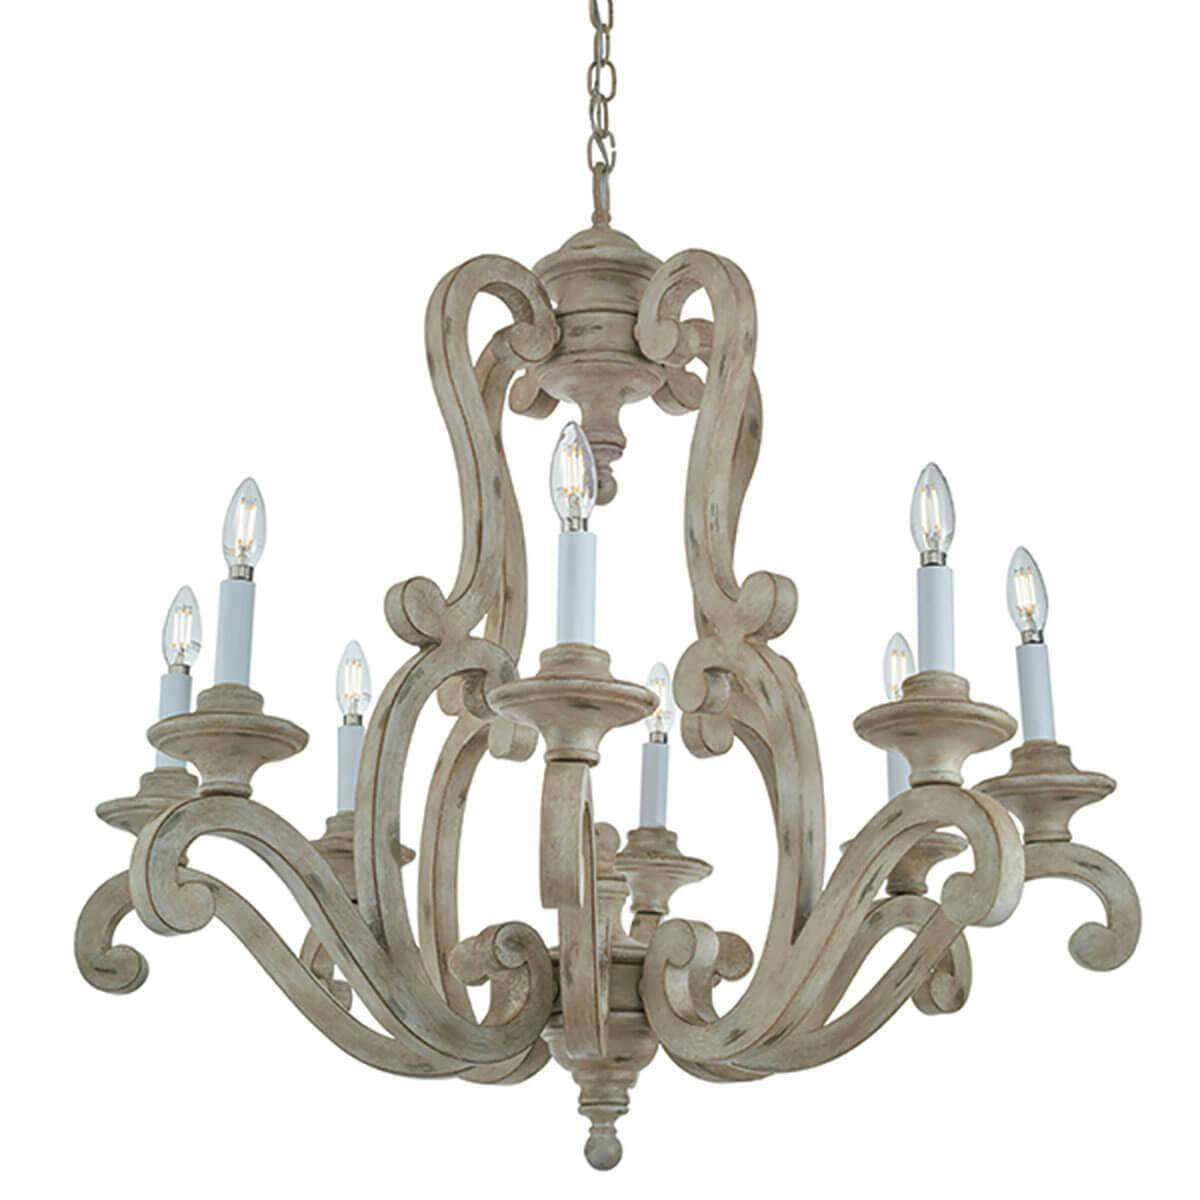 Hayman Bay™ 8 Light Chandelier White without the canopy on a white background